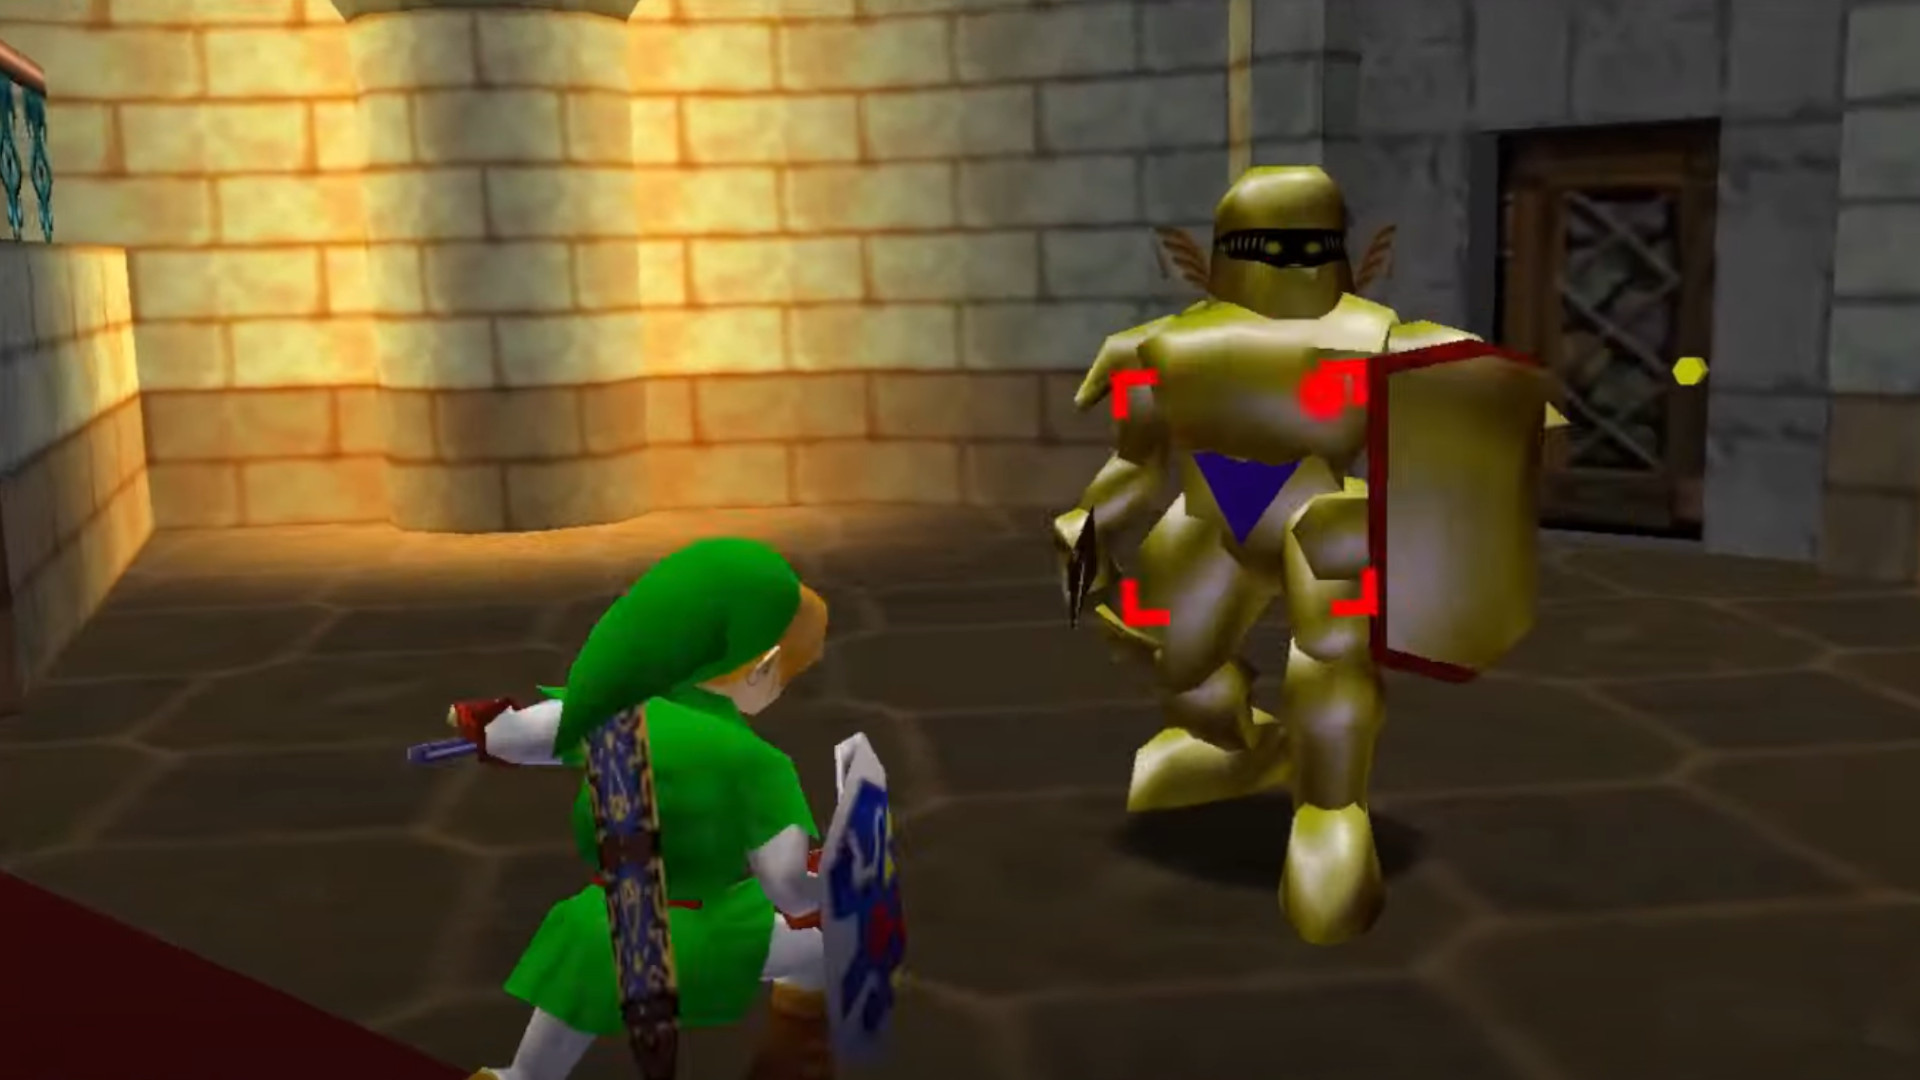 Zelda: Ocarina of Time mod aims to recreate the pre-release Space World version